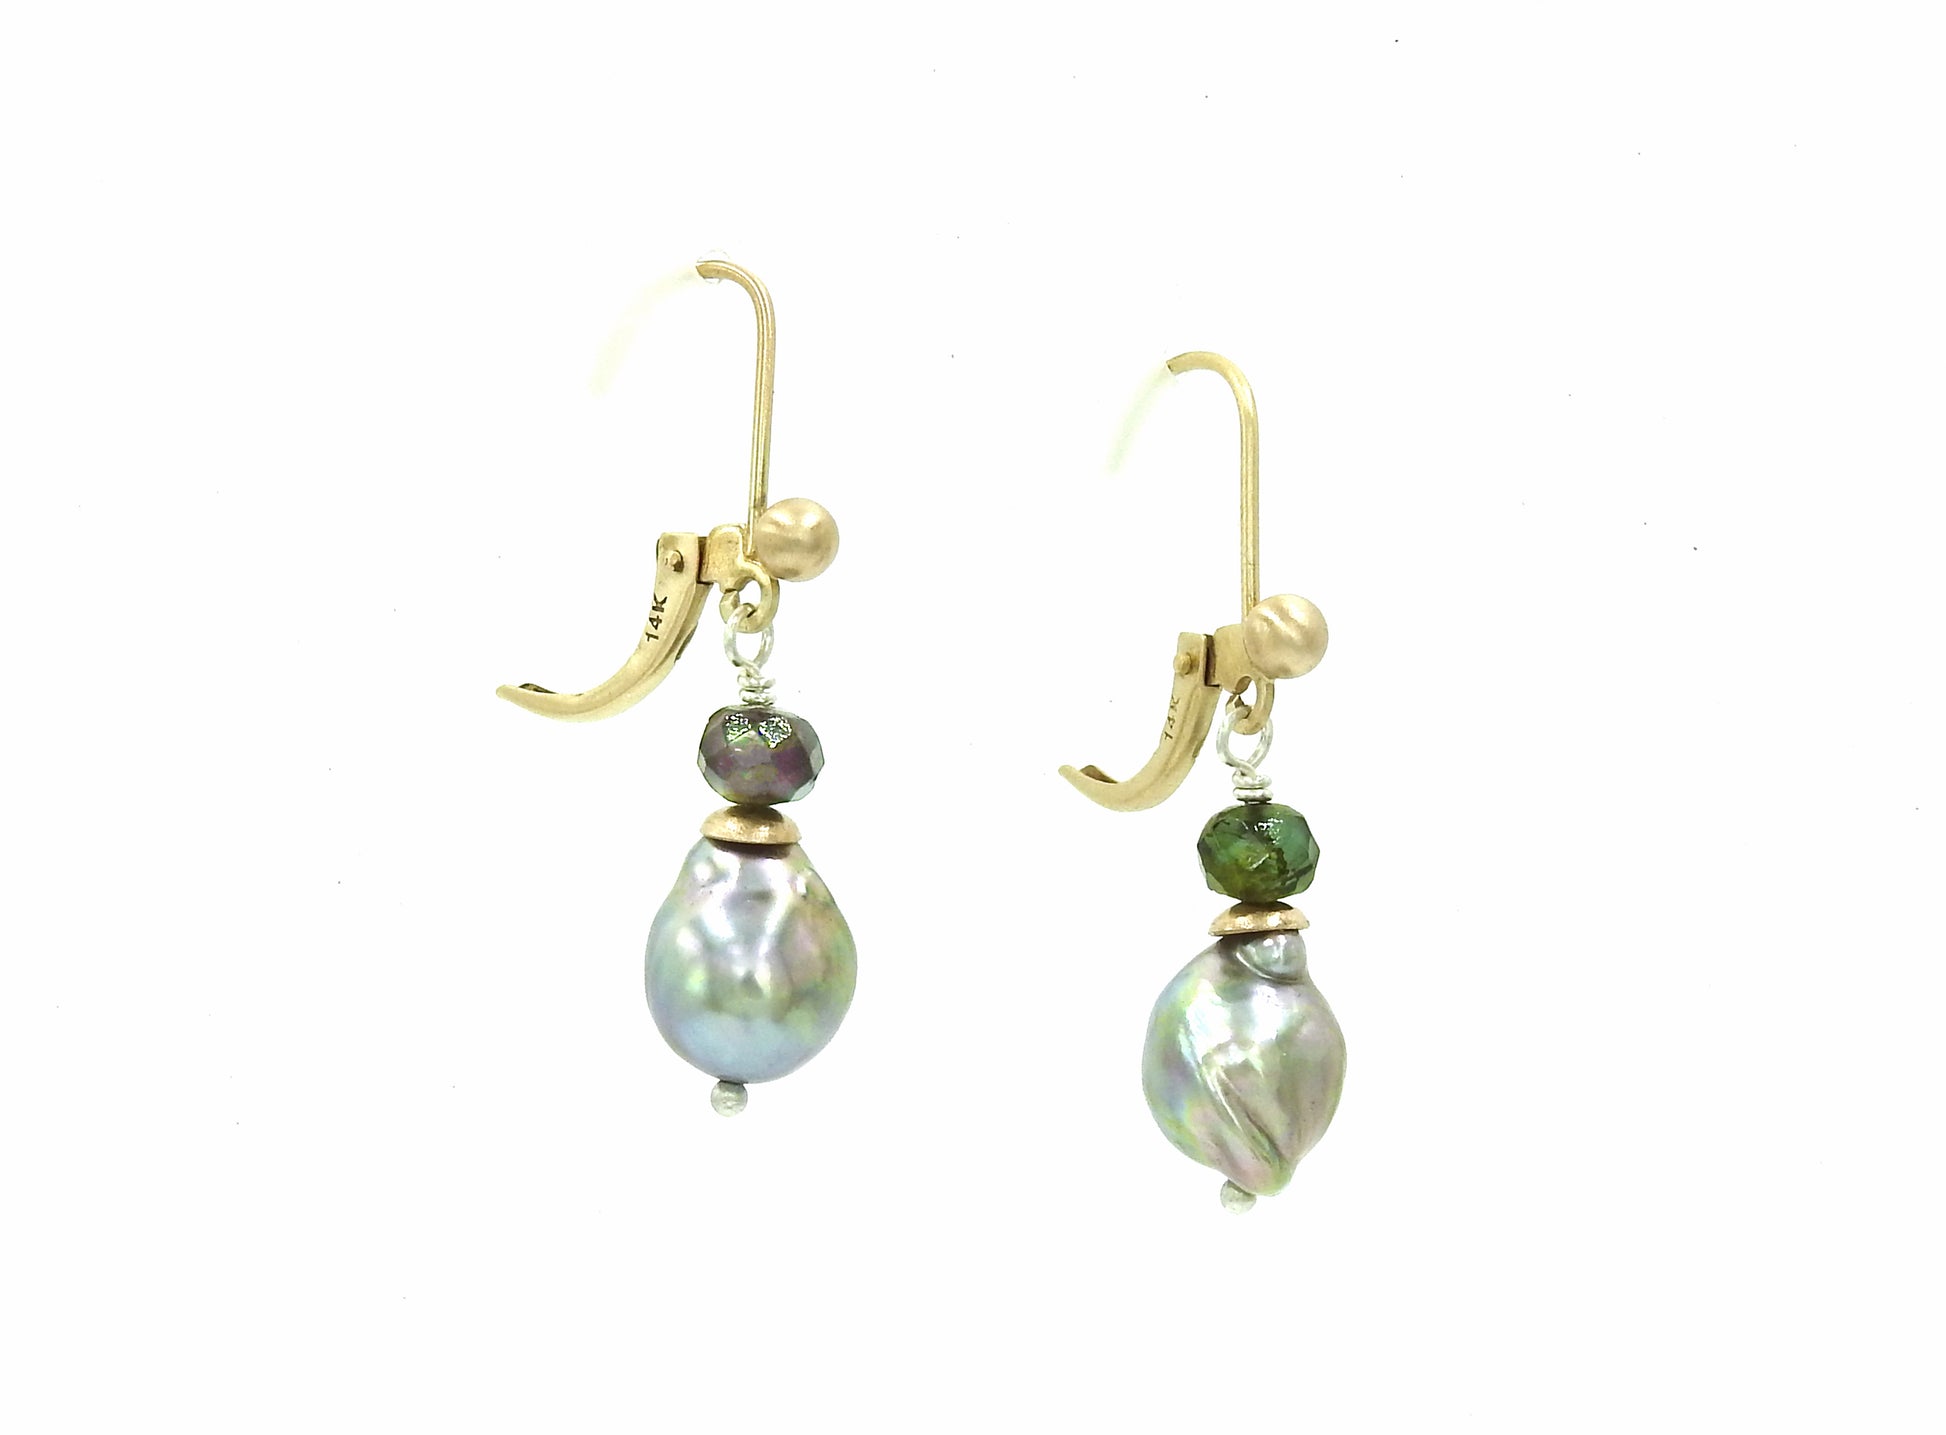 Grey baroque pearl earrings with green tourmaline and 14kt yellow gold lever backs, made by ZEALmetal, Nicole Horlor, Kingston, ON, Canada